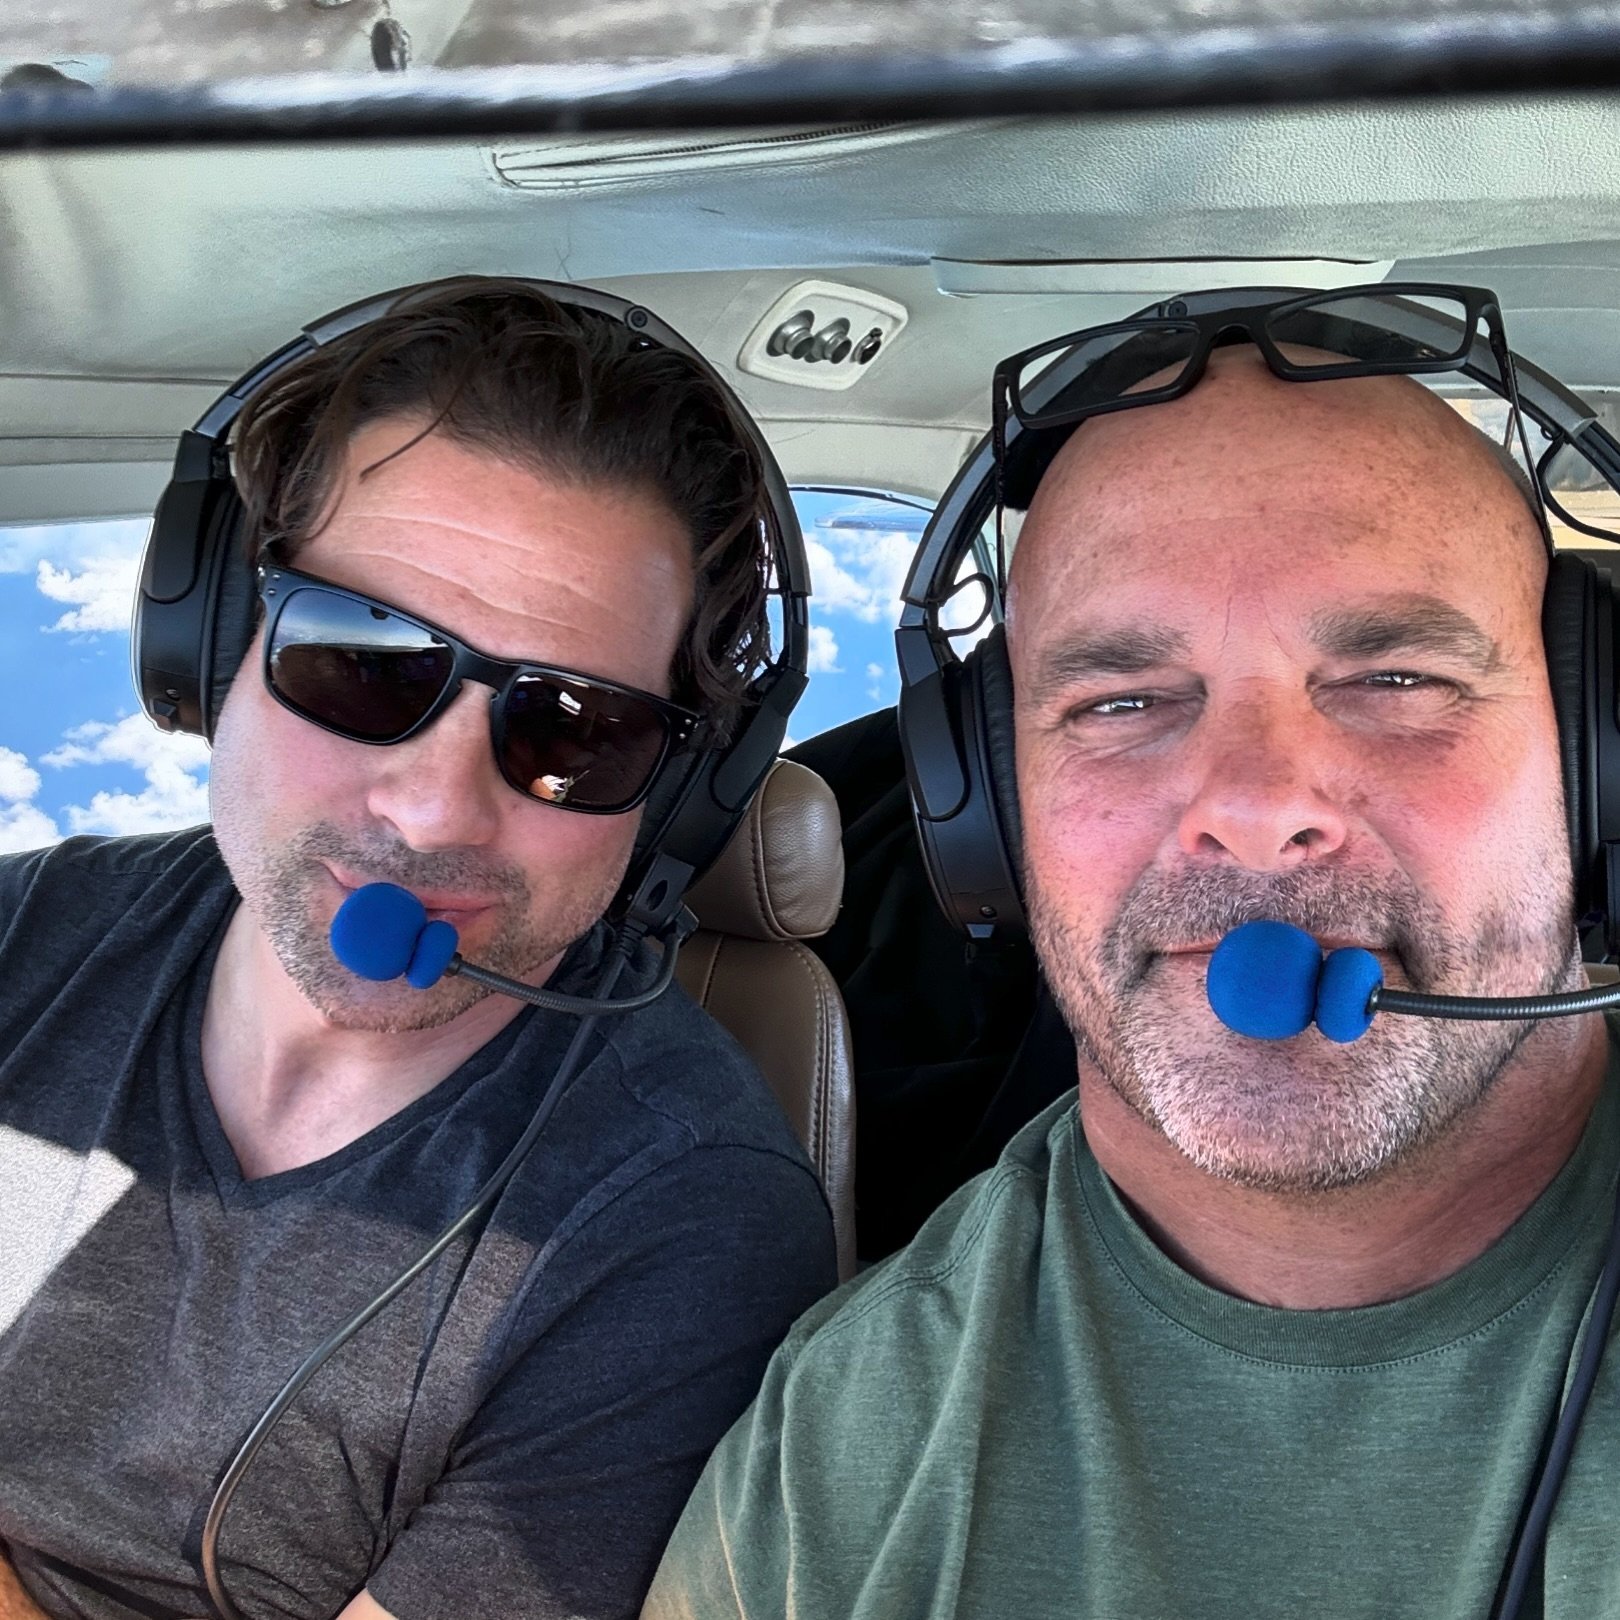 This is what happens when you don&rsquo;t secure the cabin doors before takeoff&hellip;🤦&zwj;♂️ #HitchHiker #McGillipilot #WhereAreWeGoing?!